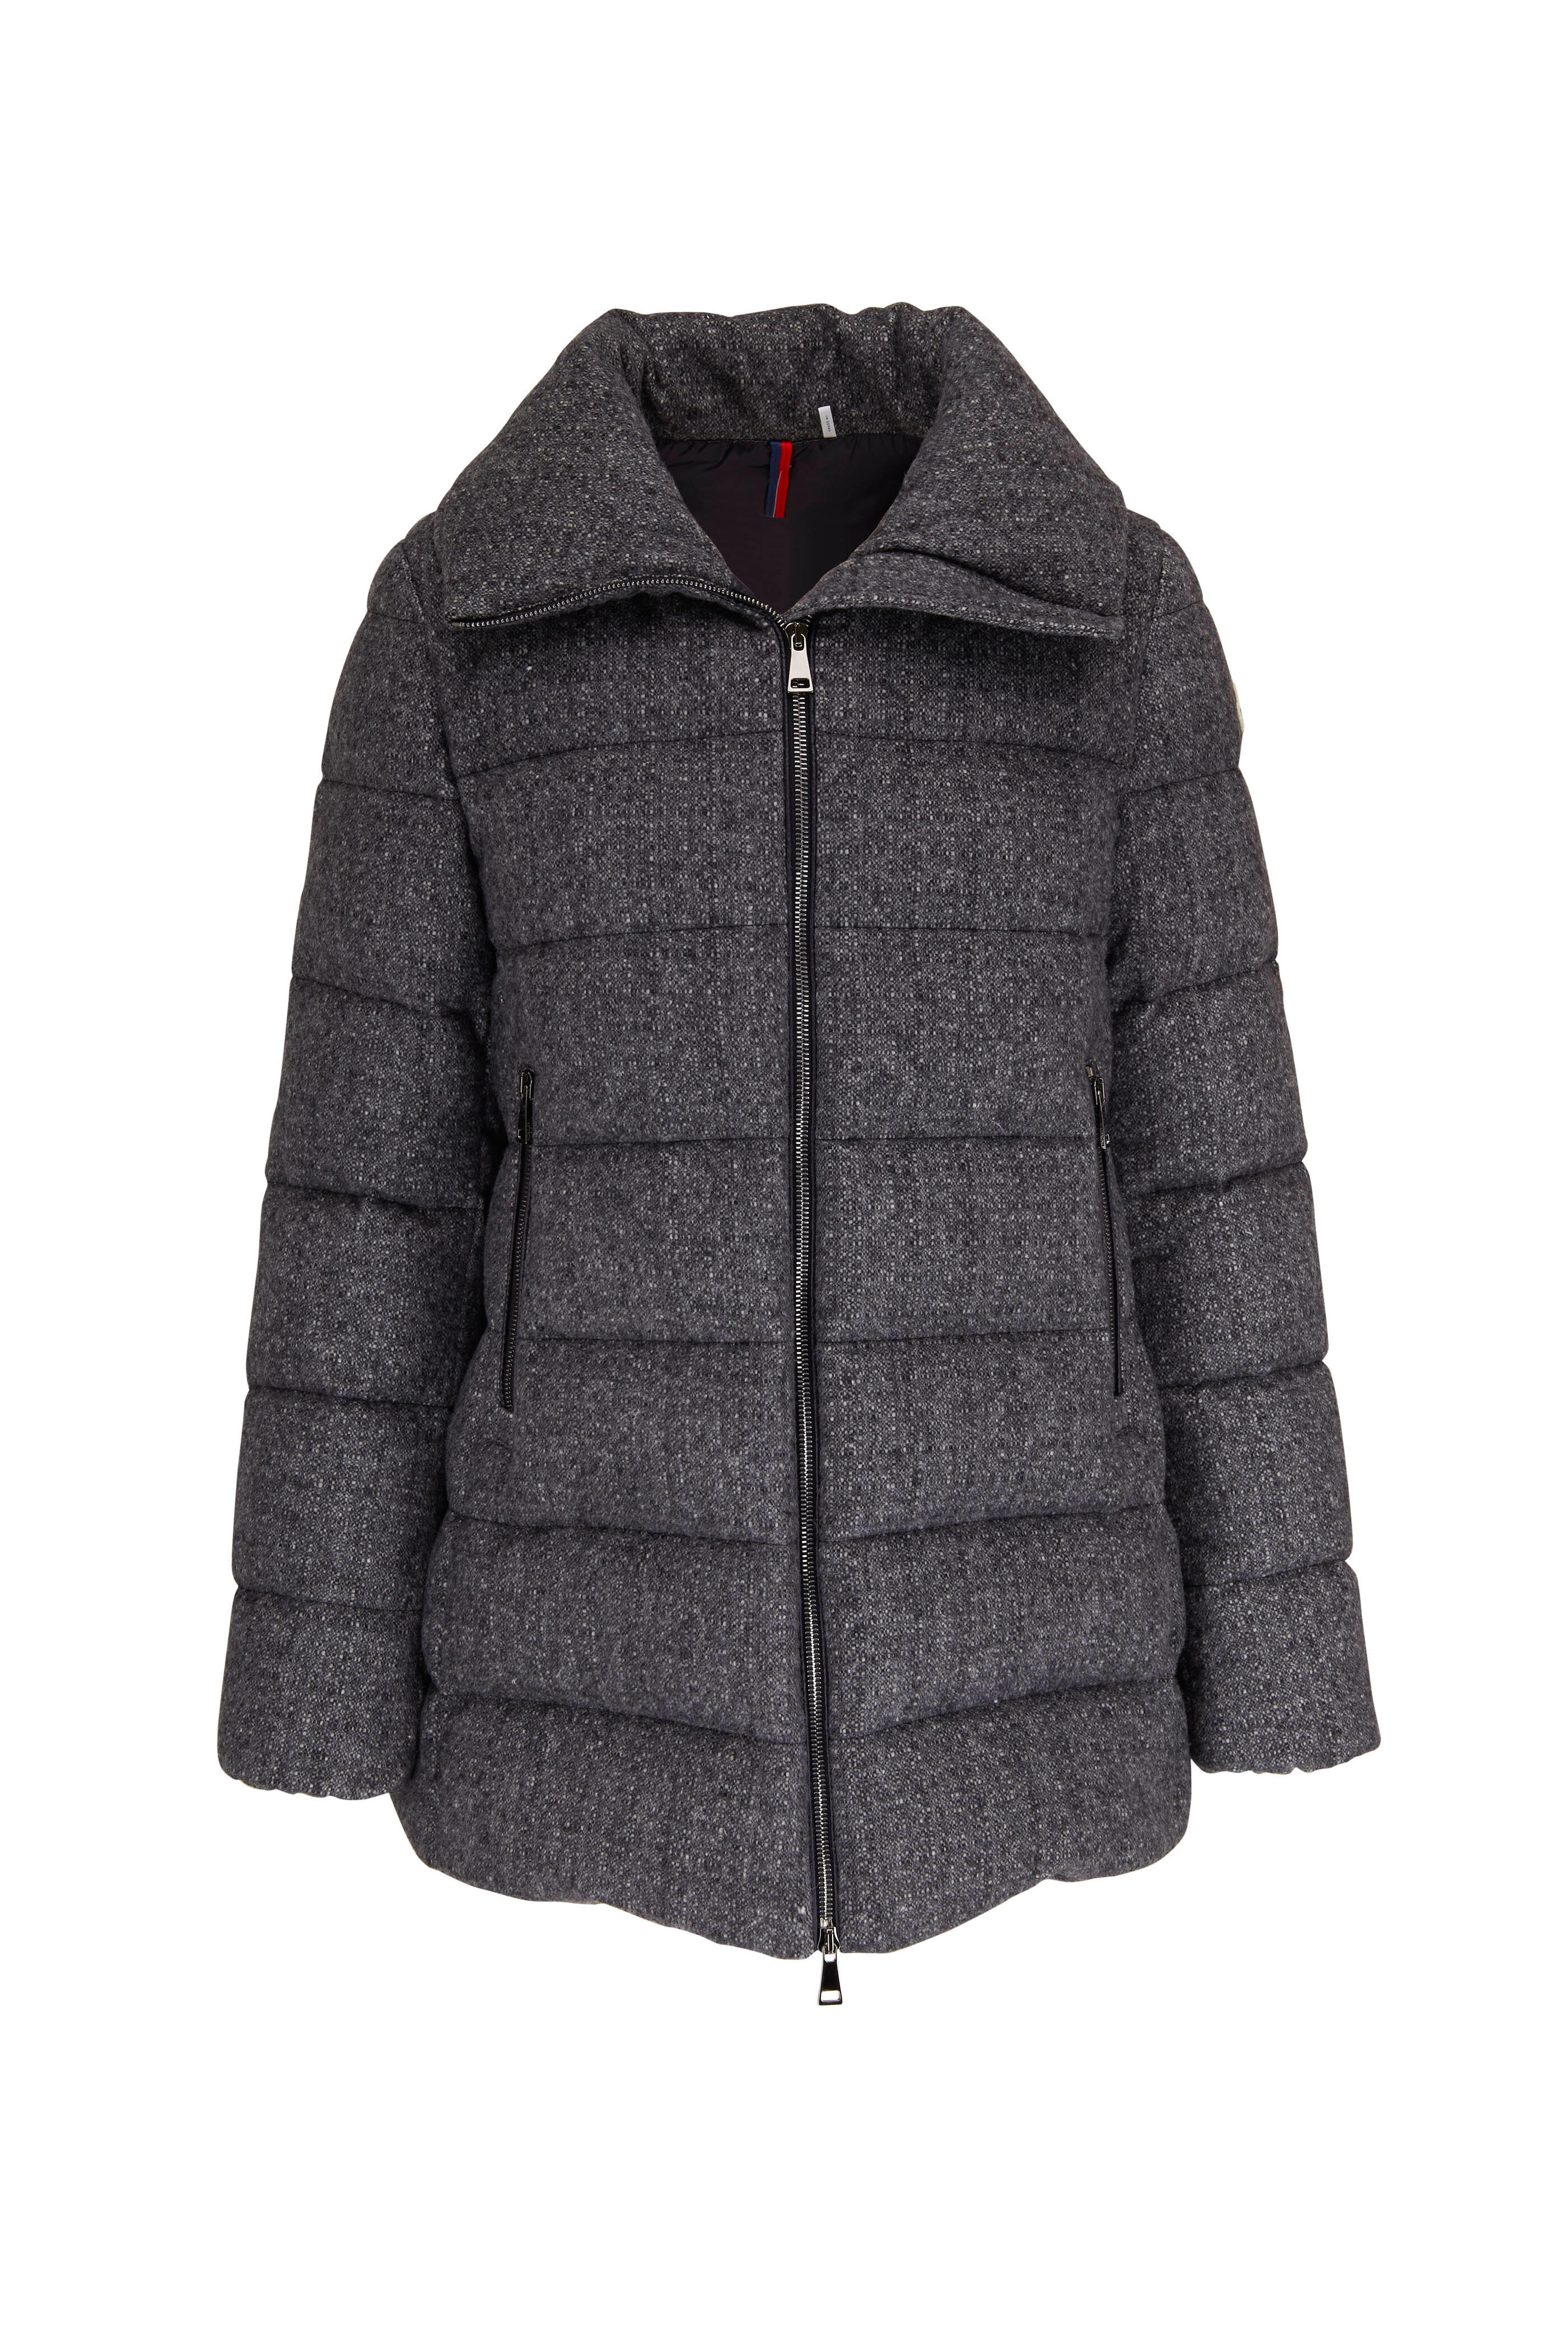 Moncler - Torcon Gray Down Donegal Tweed Jacket | Mitchell Stores